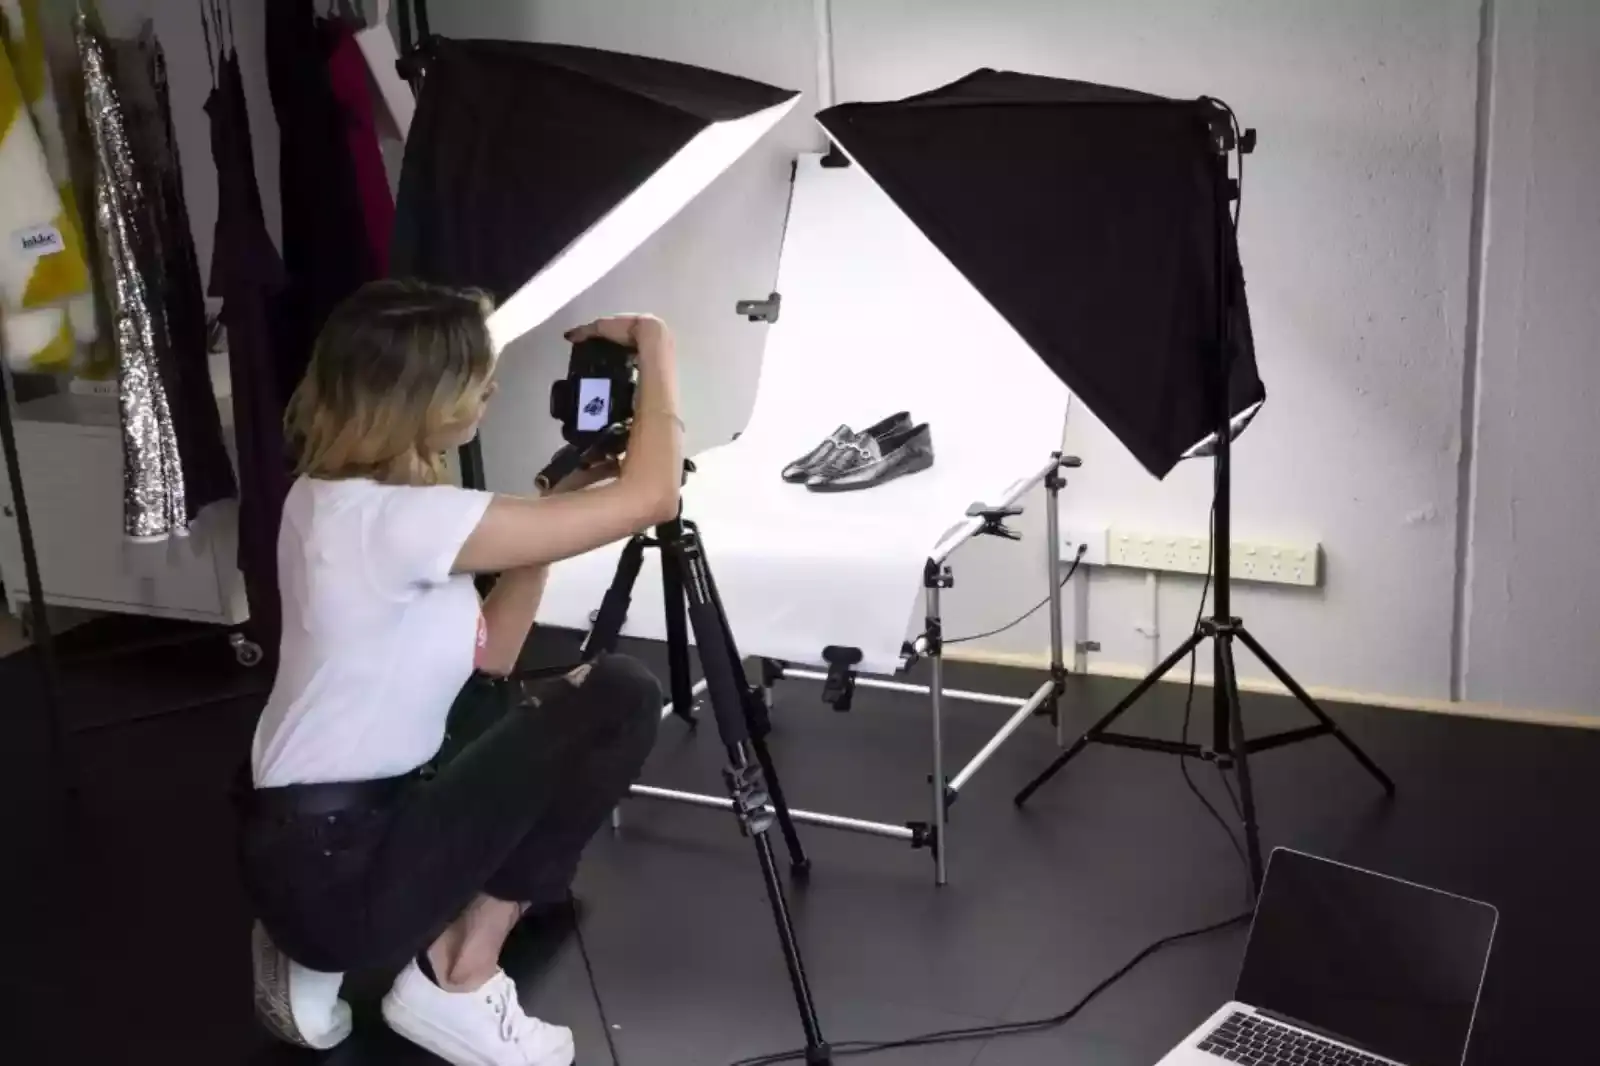 Why we need Product Photography in Business